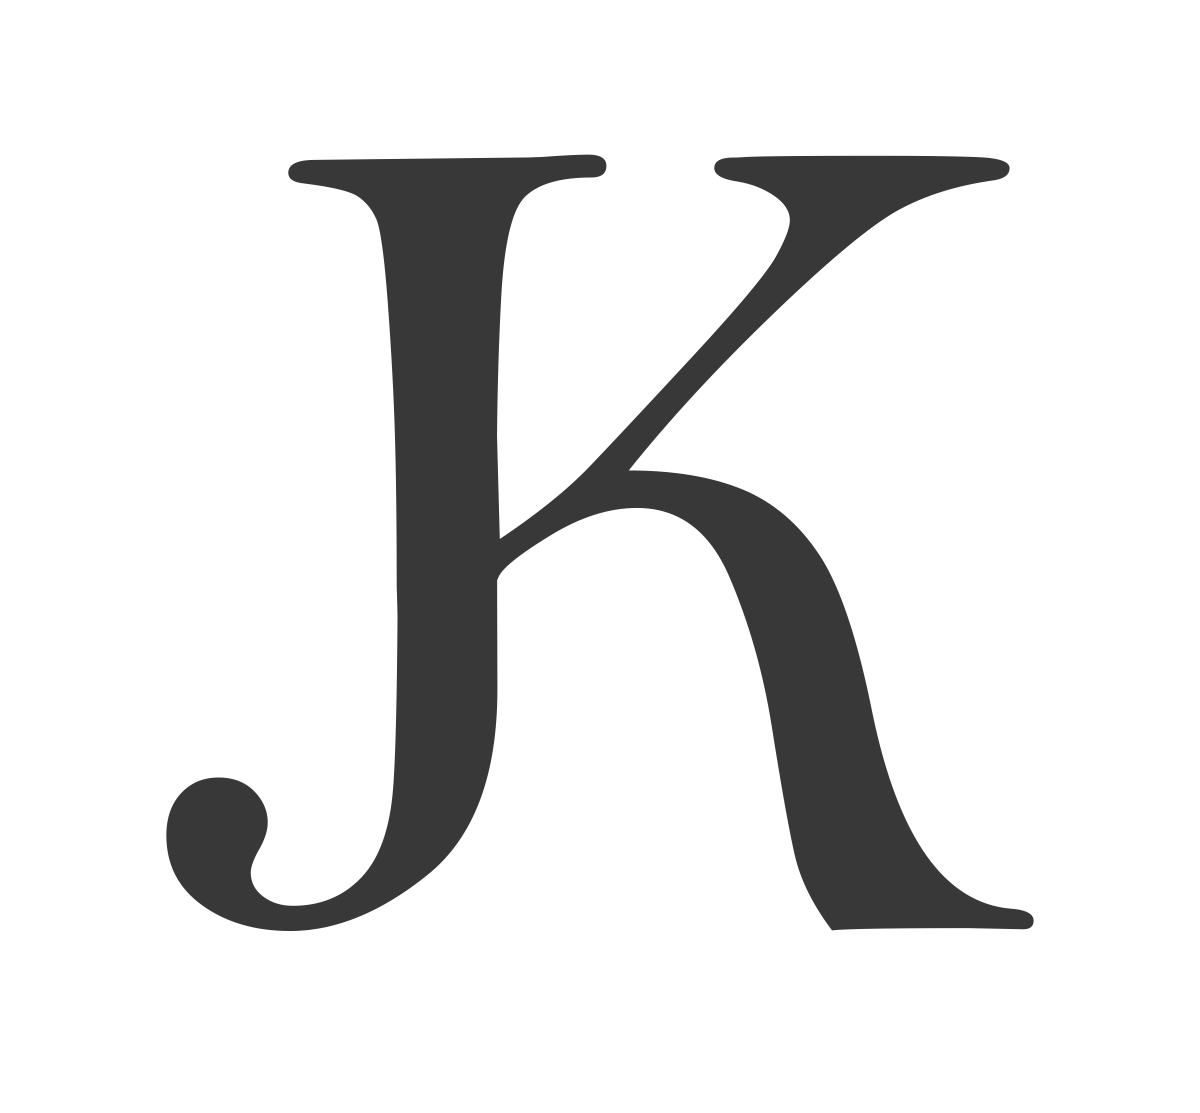 My initials are JK. White background + black text. Uppercase J and K letters combined into one glyph.